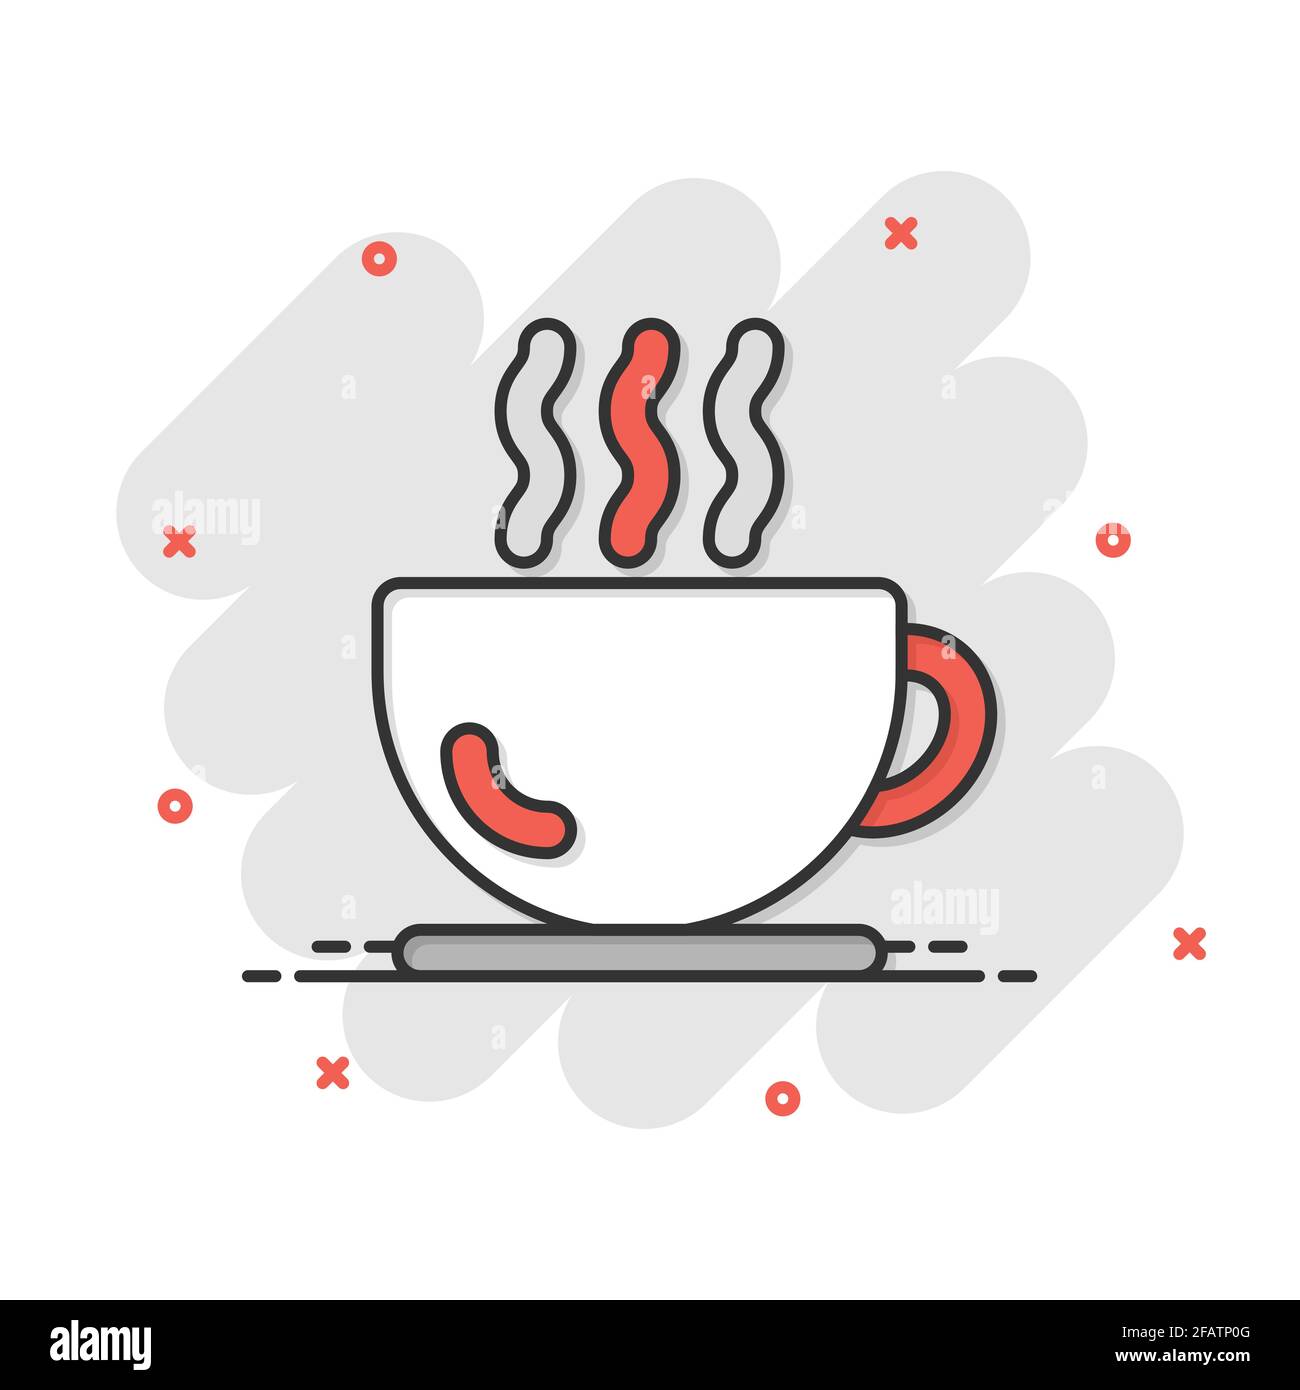 Coffee cup icon in comic style. Hot tea cartoon vector illustration on white isolated background. Drink mug splash effect business concept. Stock Vector